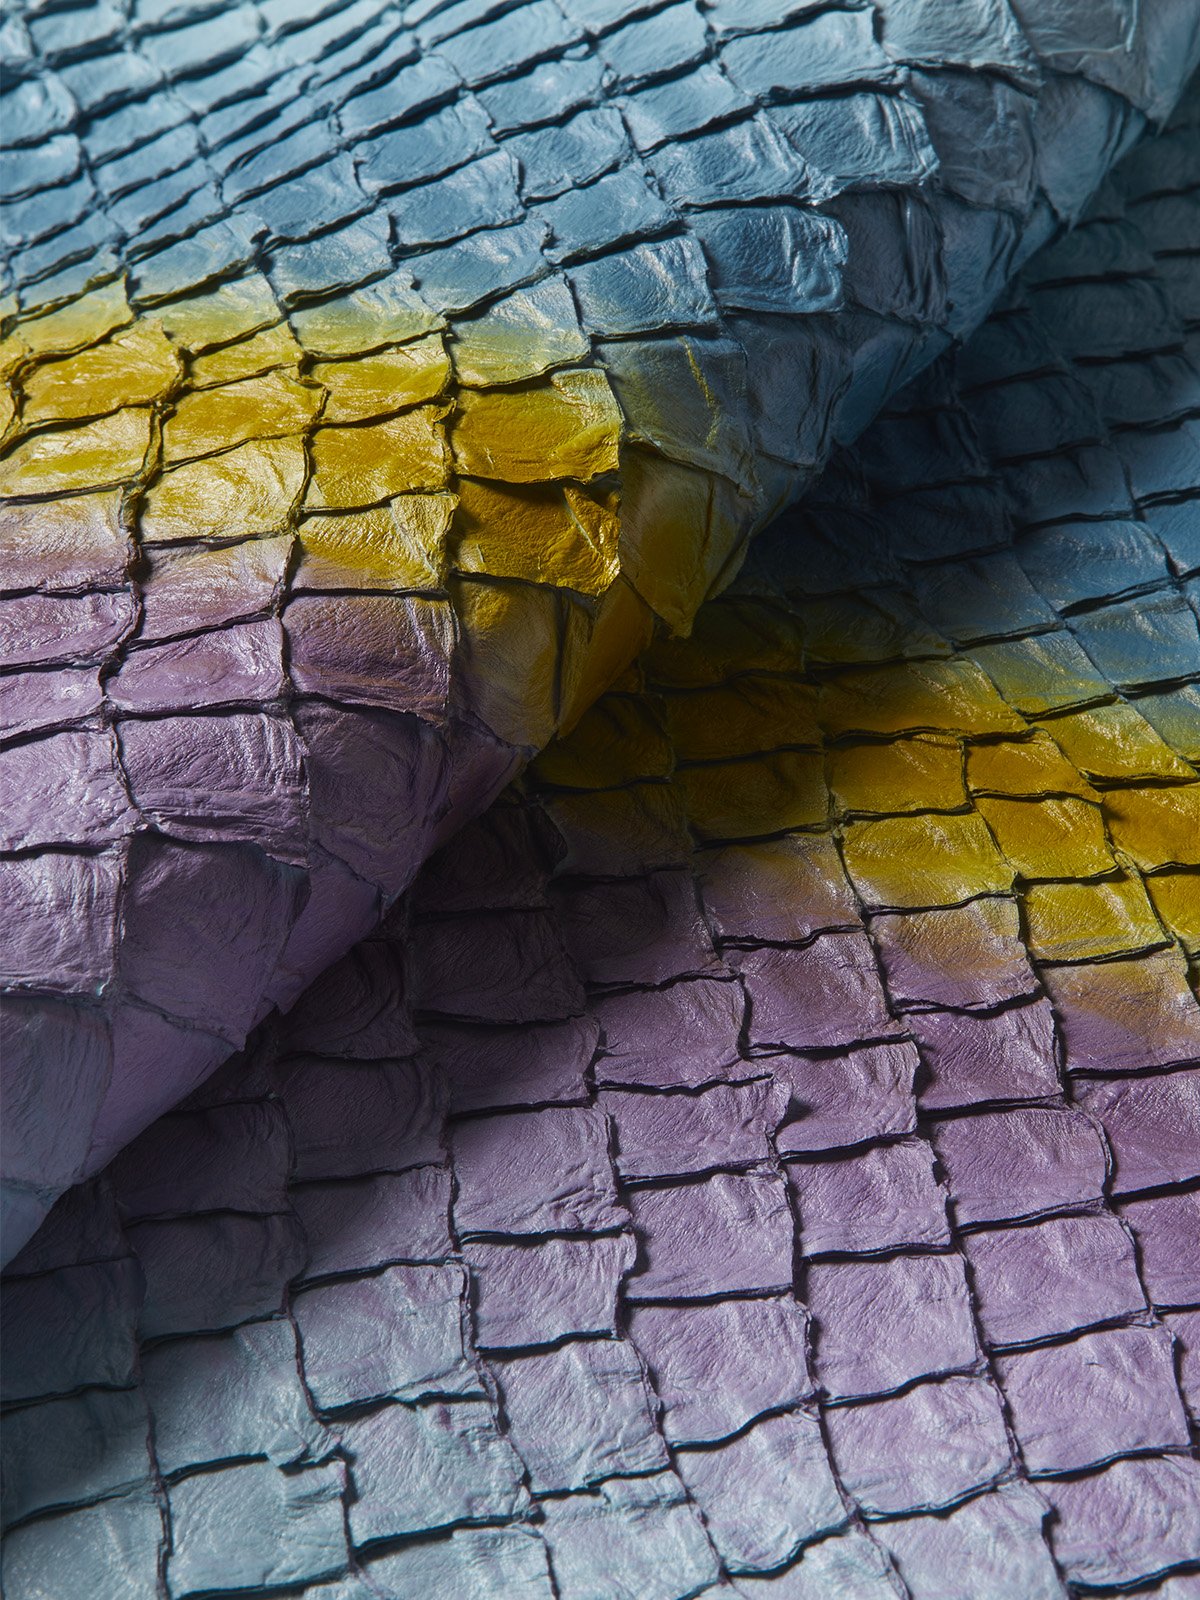 Pirarucu leather, hand-dyed crocodile, and organic conce: the latest eco-sustainable innovations from the prized